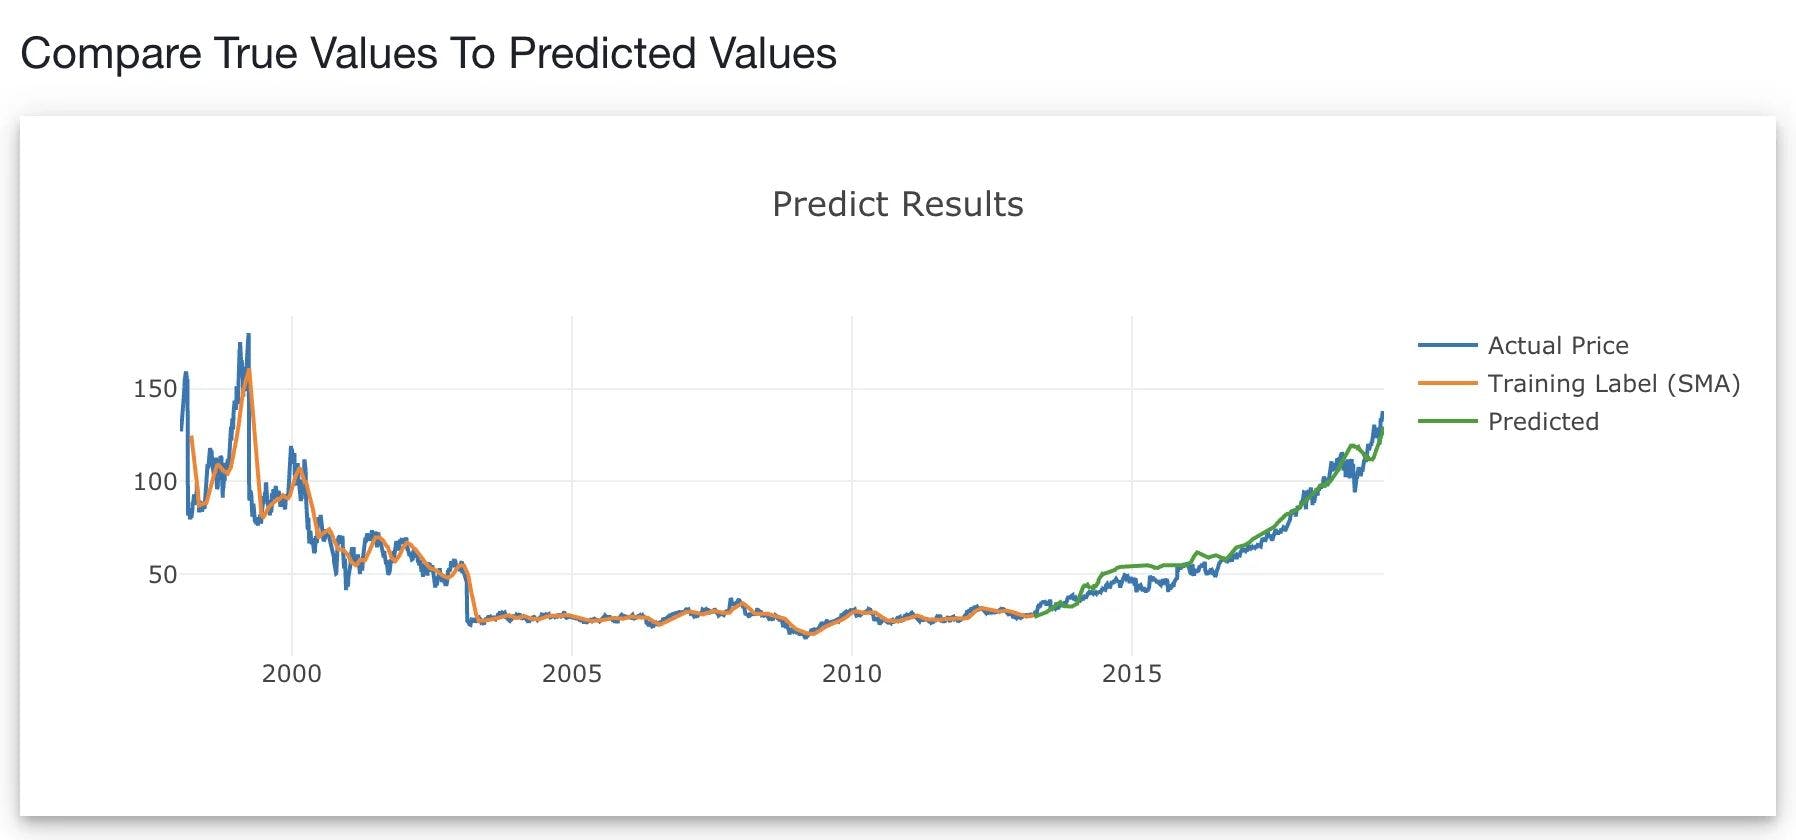 The green line denotes the prediction of the validation data, from web demo